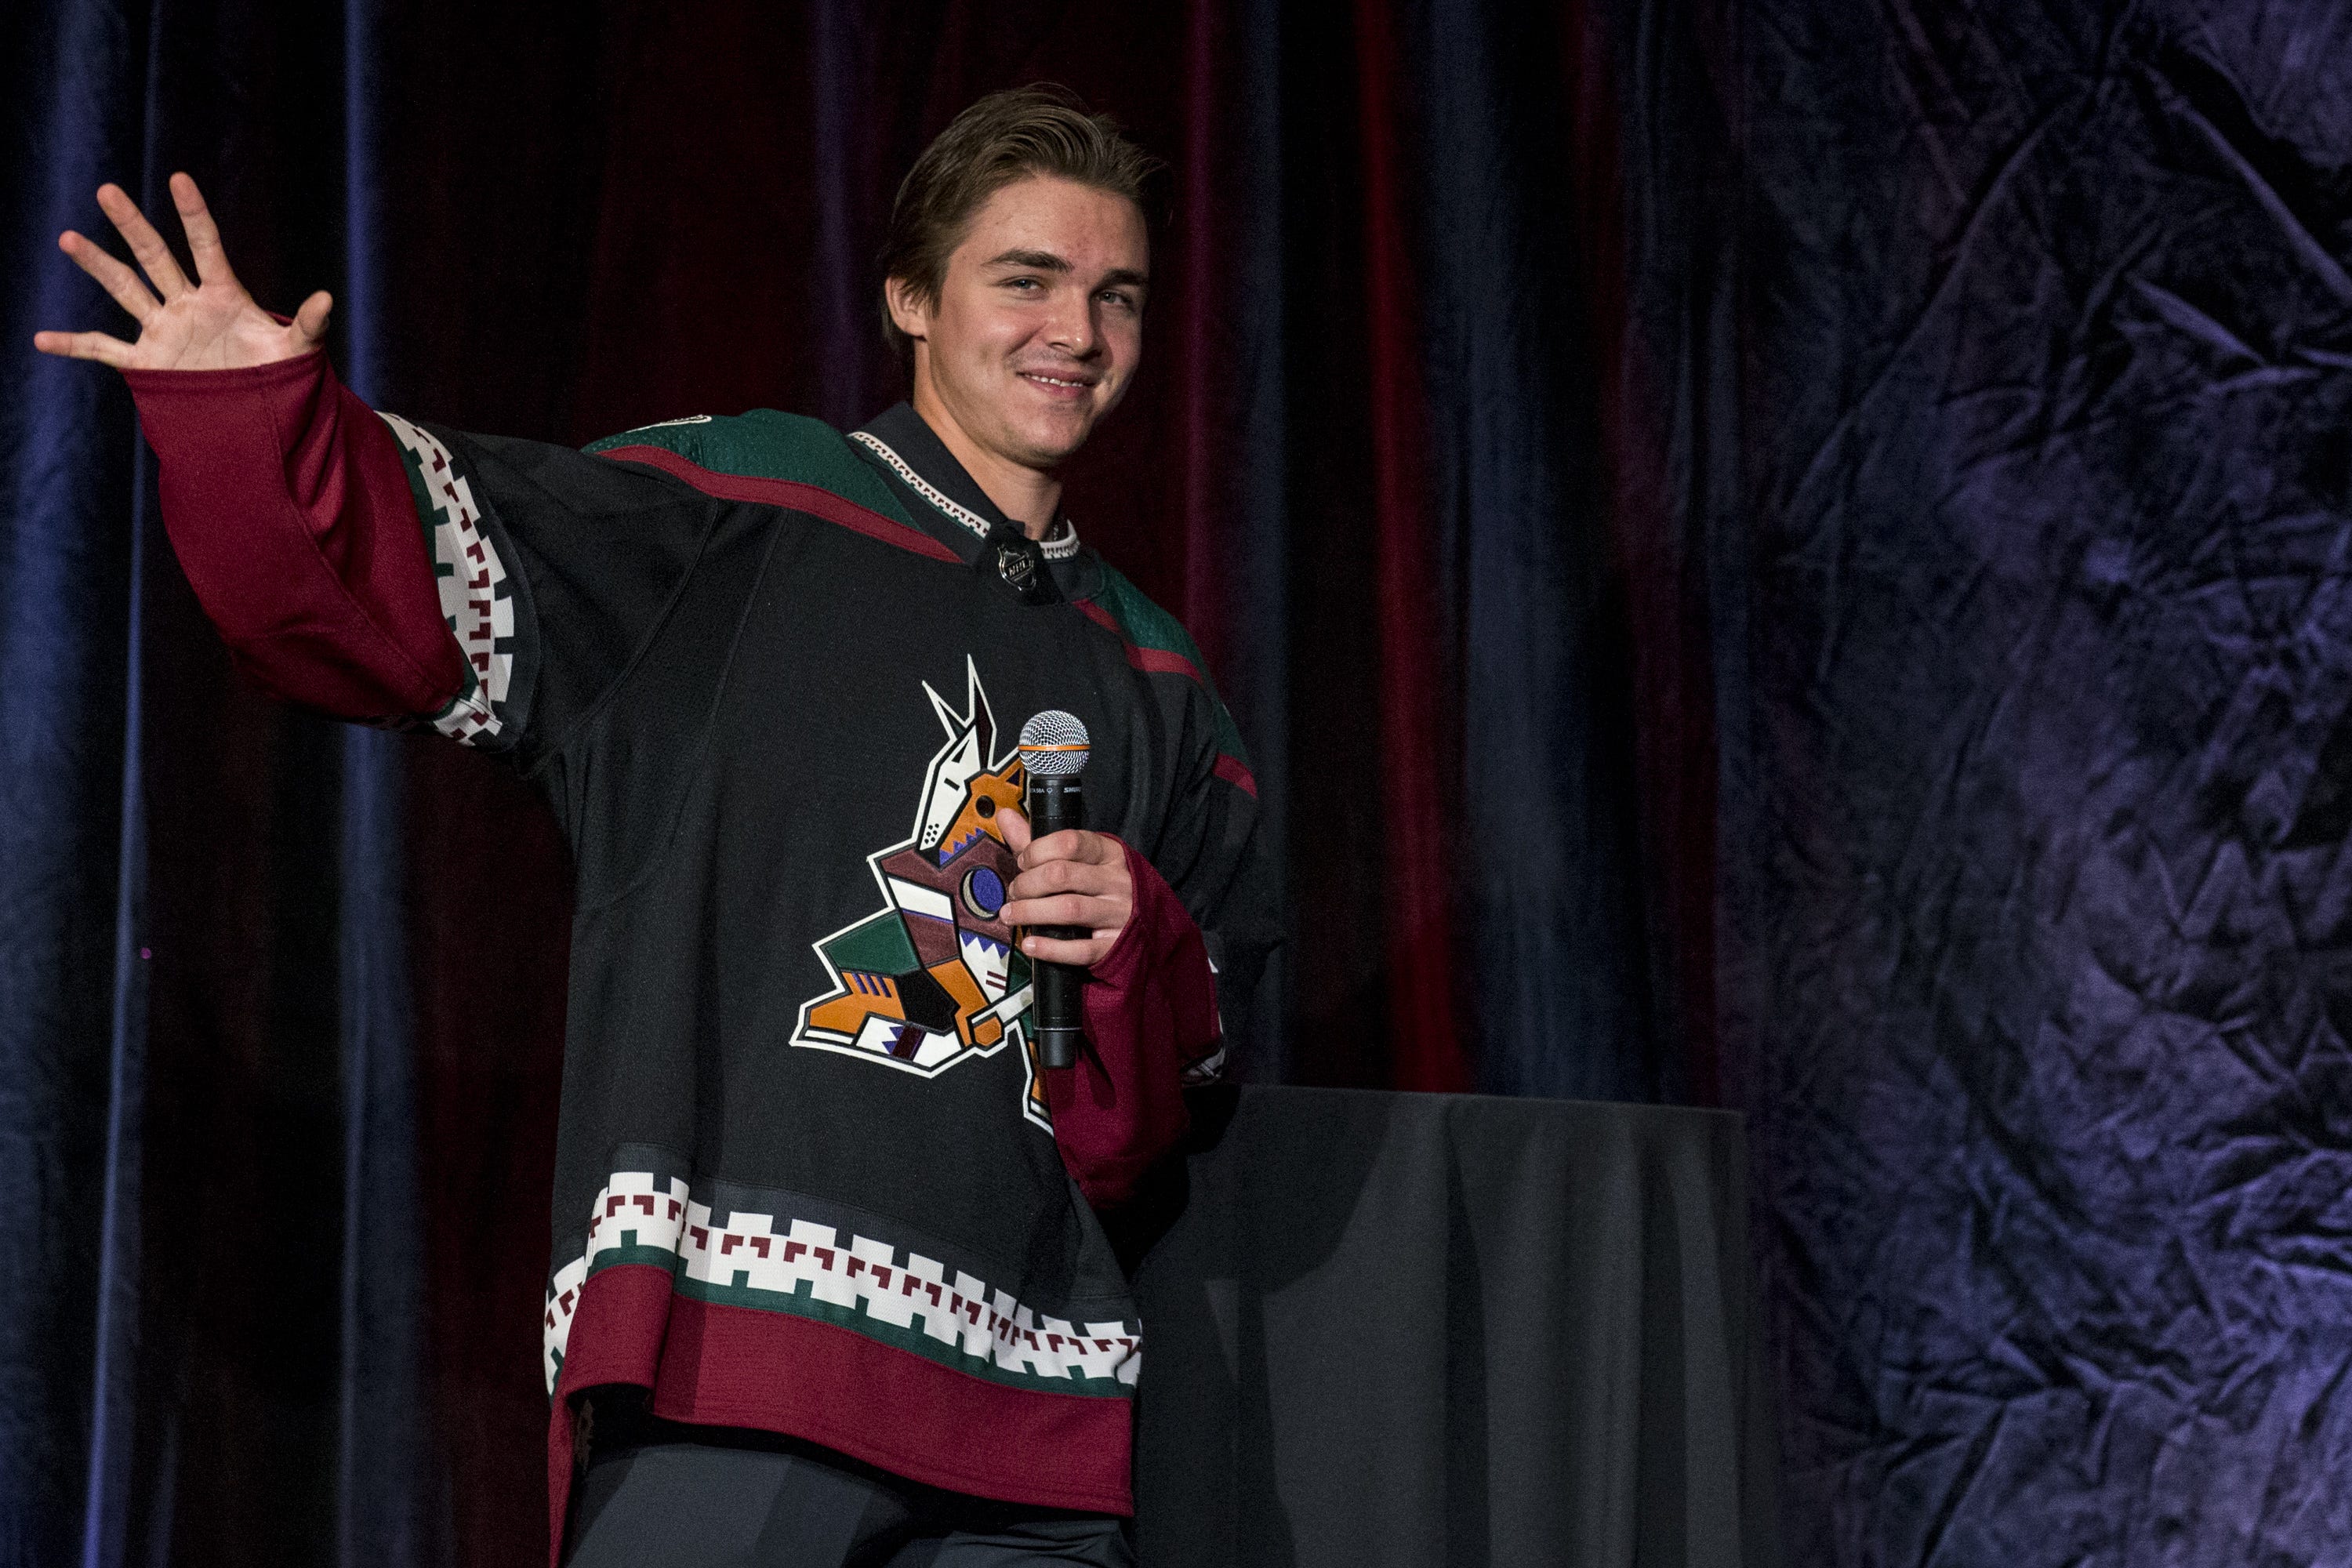 new coyotes jersey